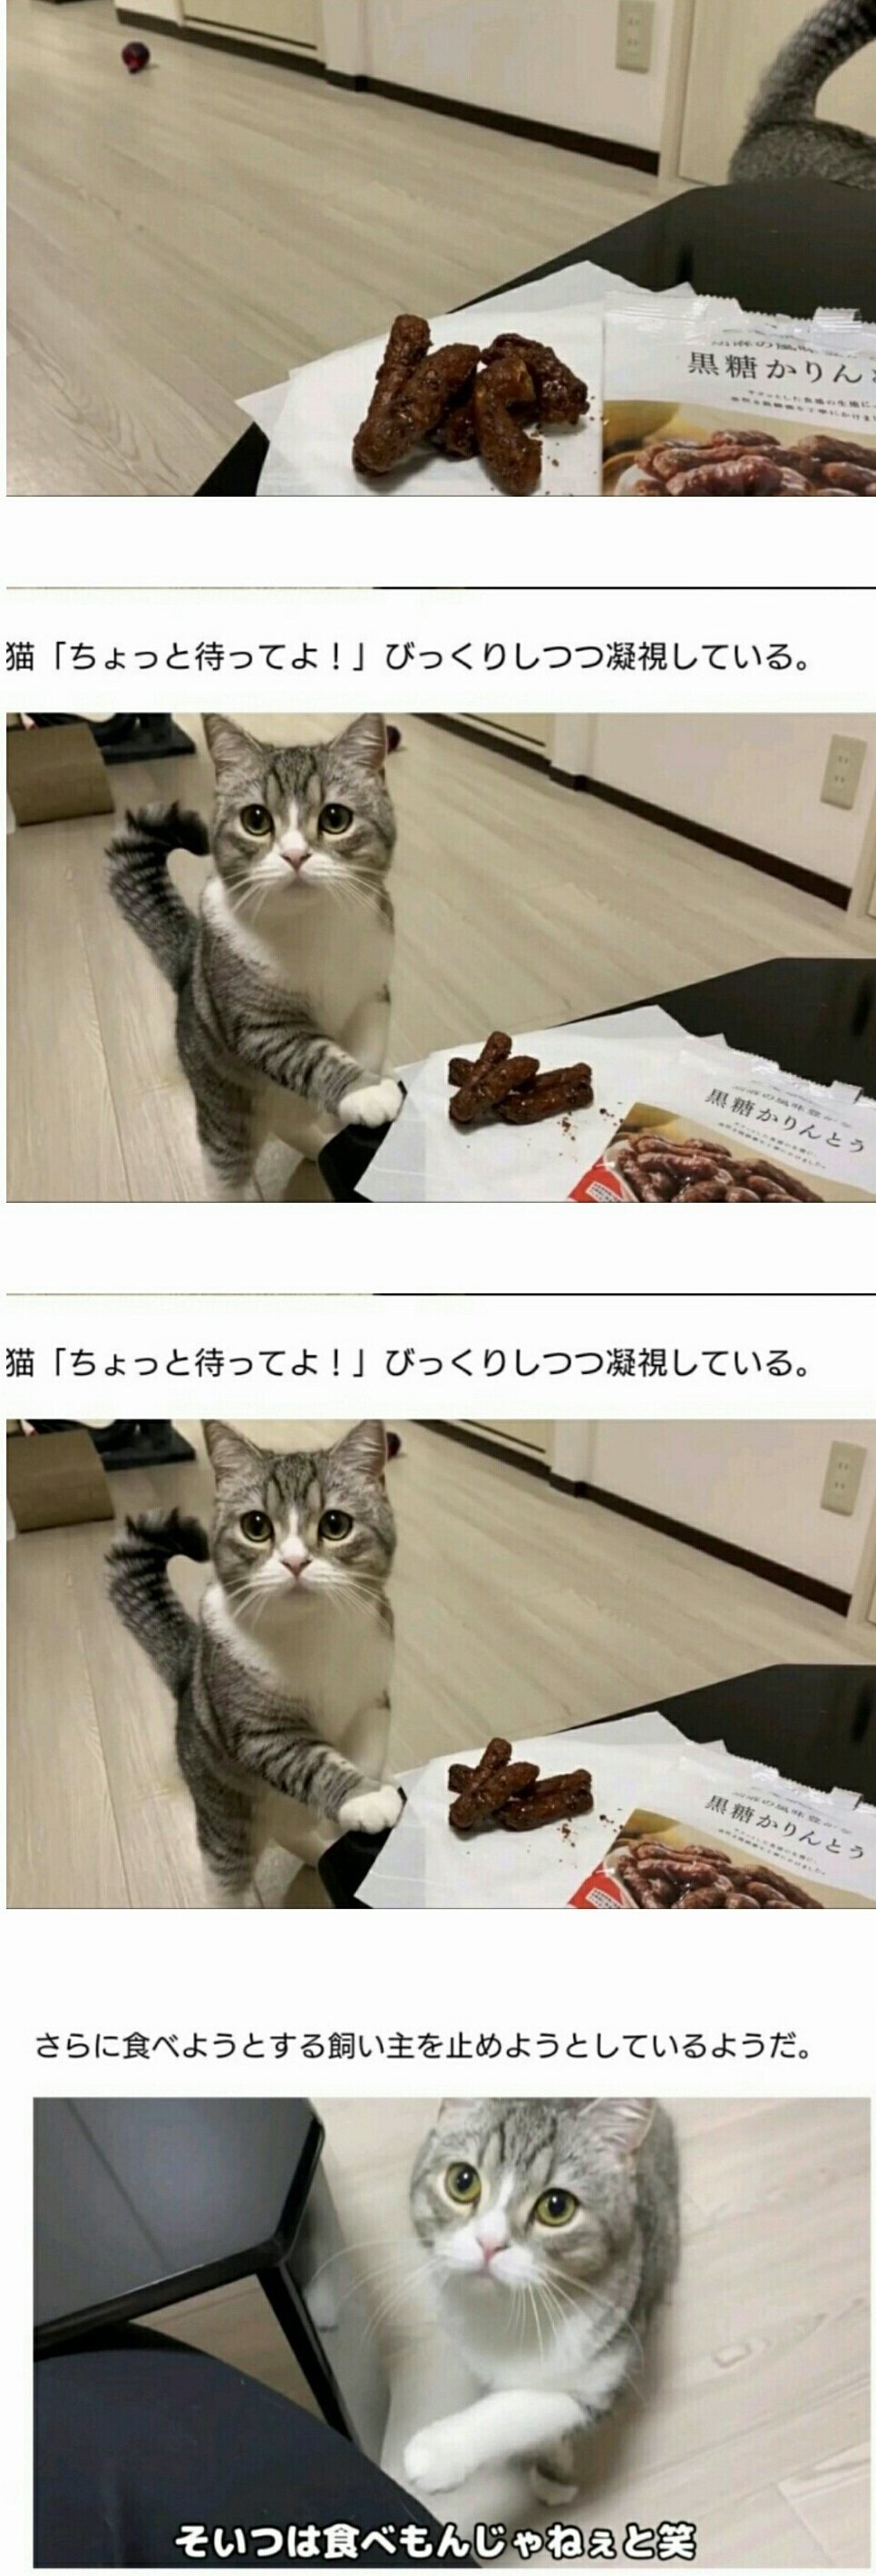 A cat that stops a butler from eating snacks.jpg